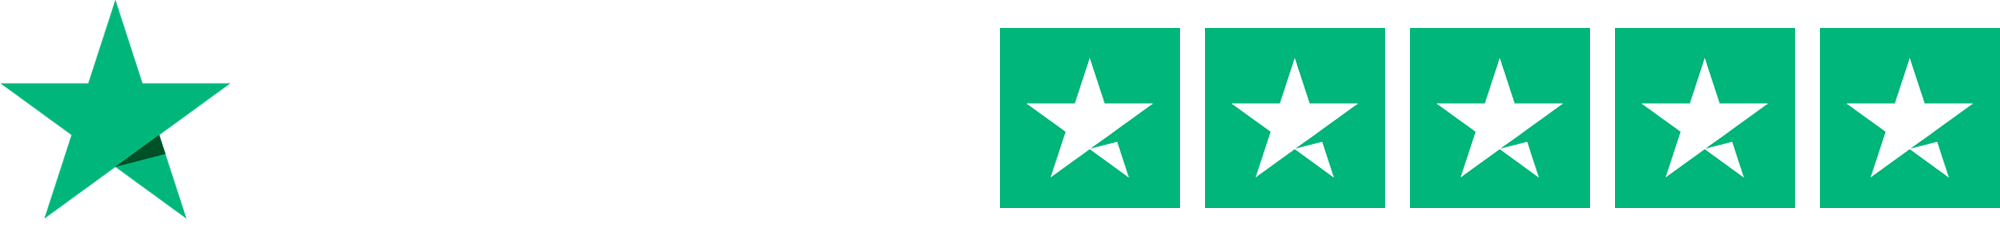 Ad Security Systems Trustpilot Rating